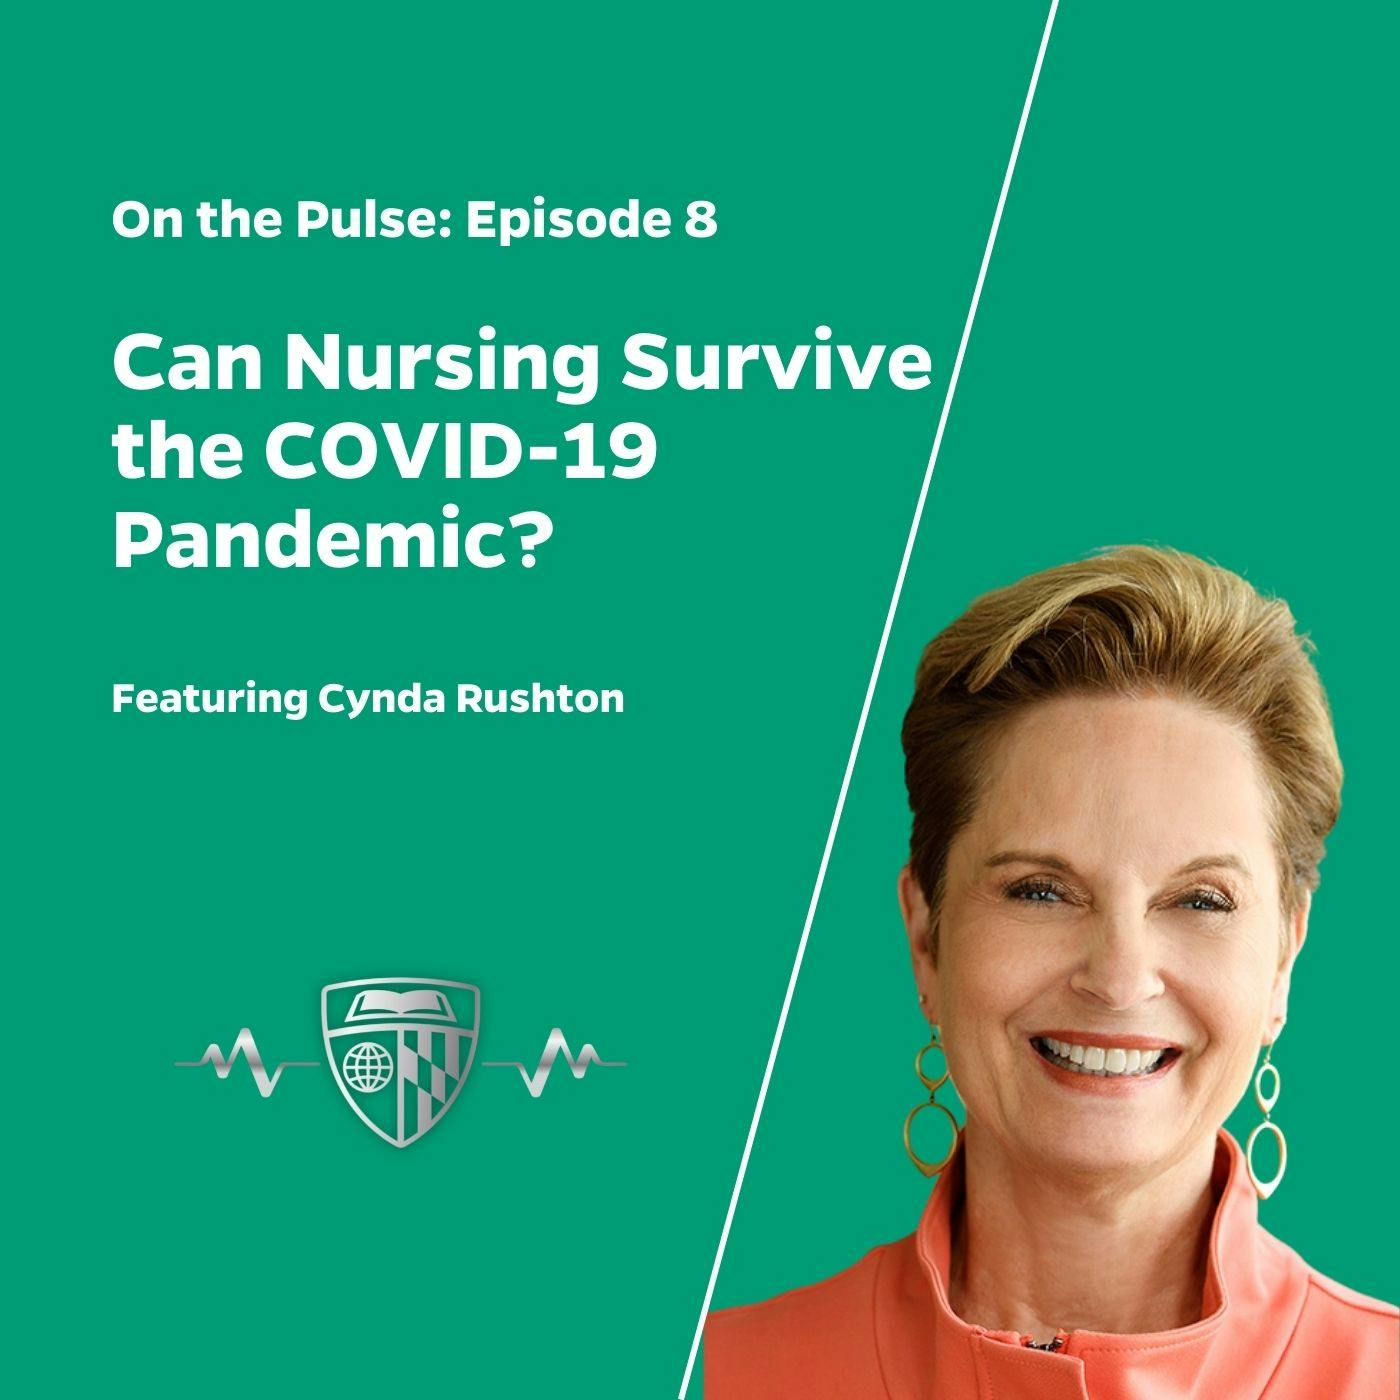 On The Pulse: Can Nursing Survive the COVID-19 Pandemic?